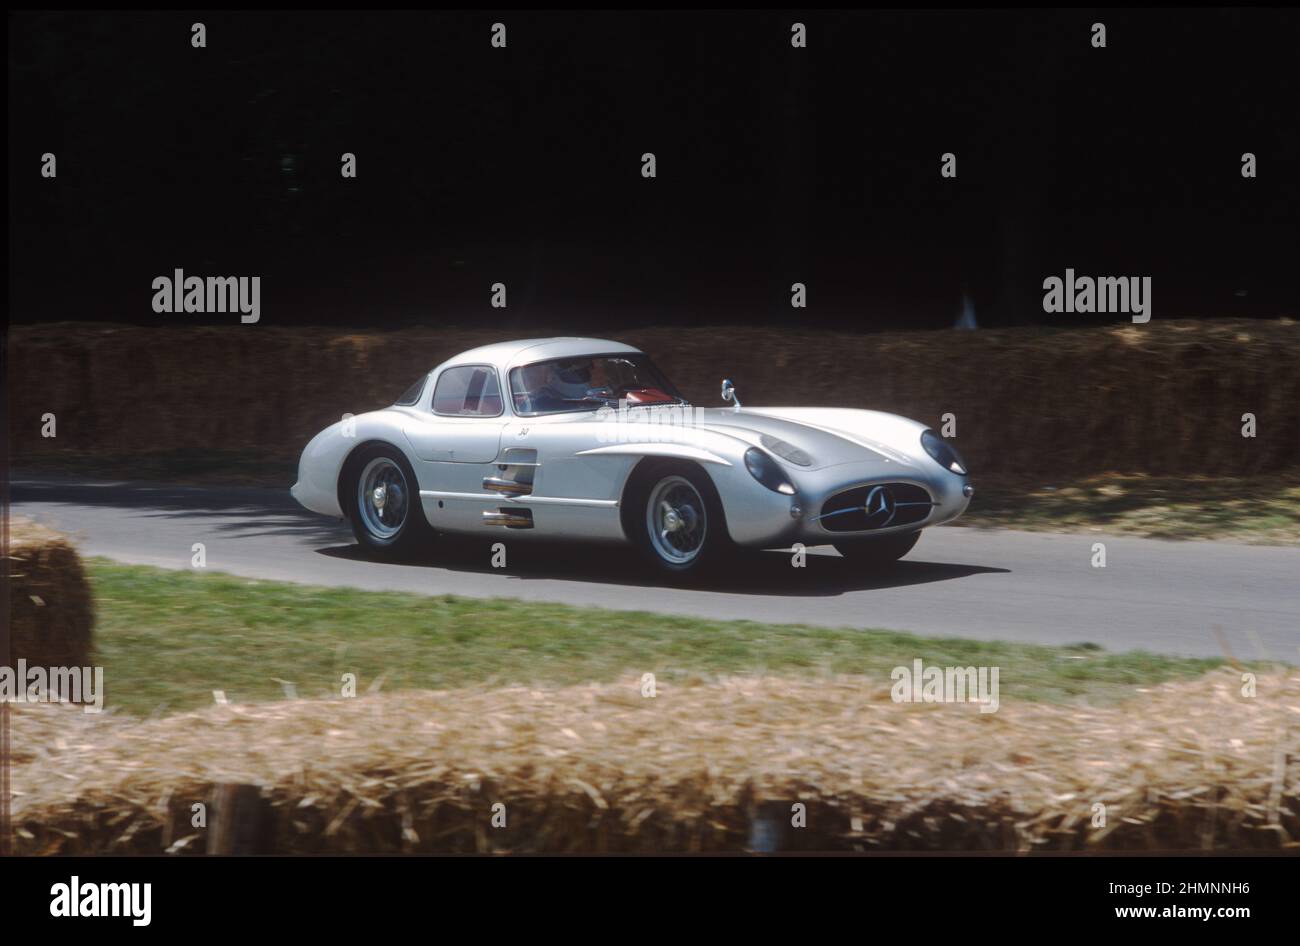 One of only tw0 1955 Mercedes 300 SLR Coupes - this the one with the red interior - in action at the 2003 Goodwood Festival of Speed. Stock Photo